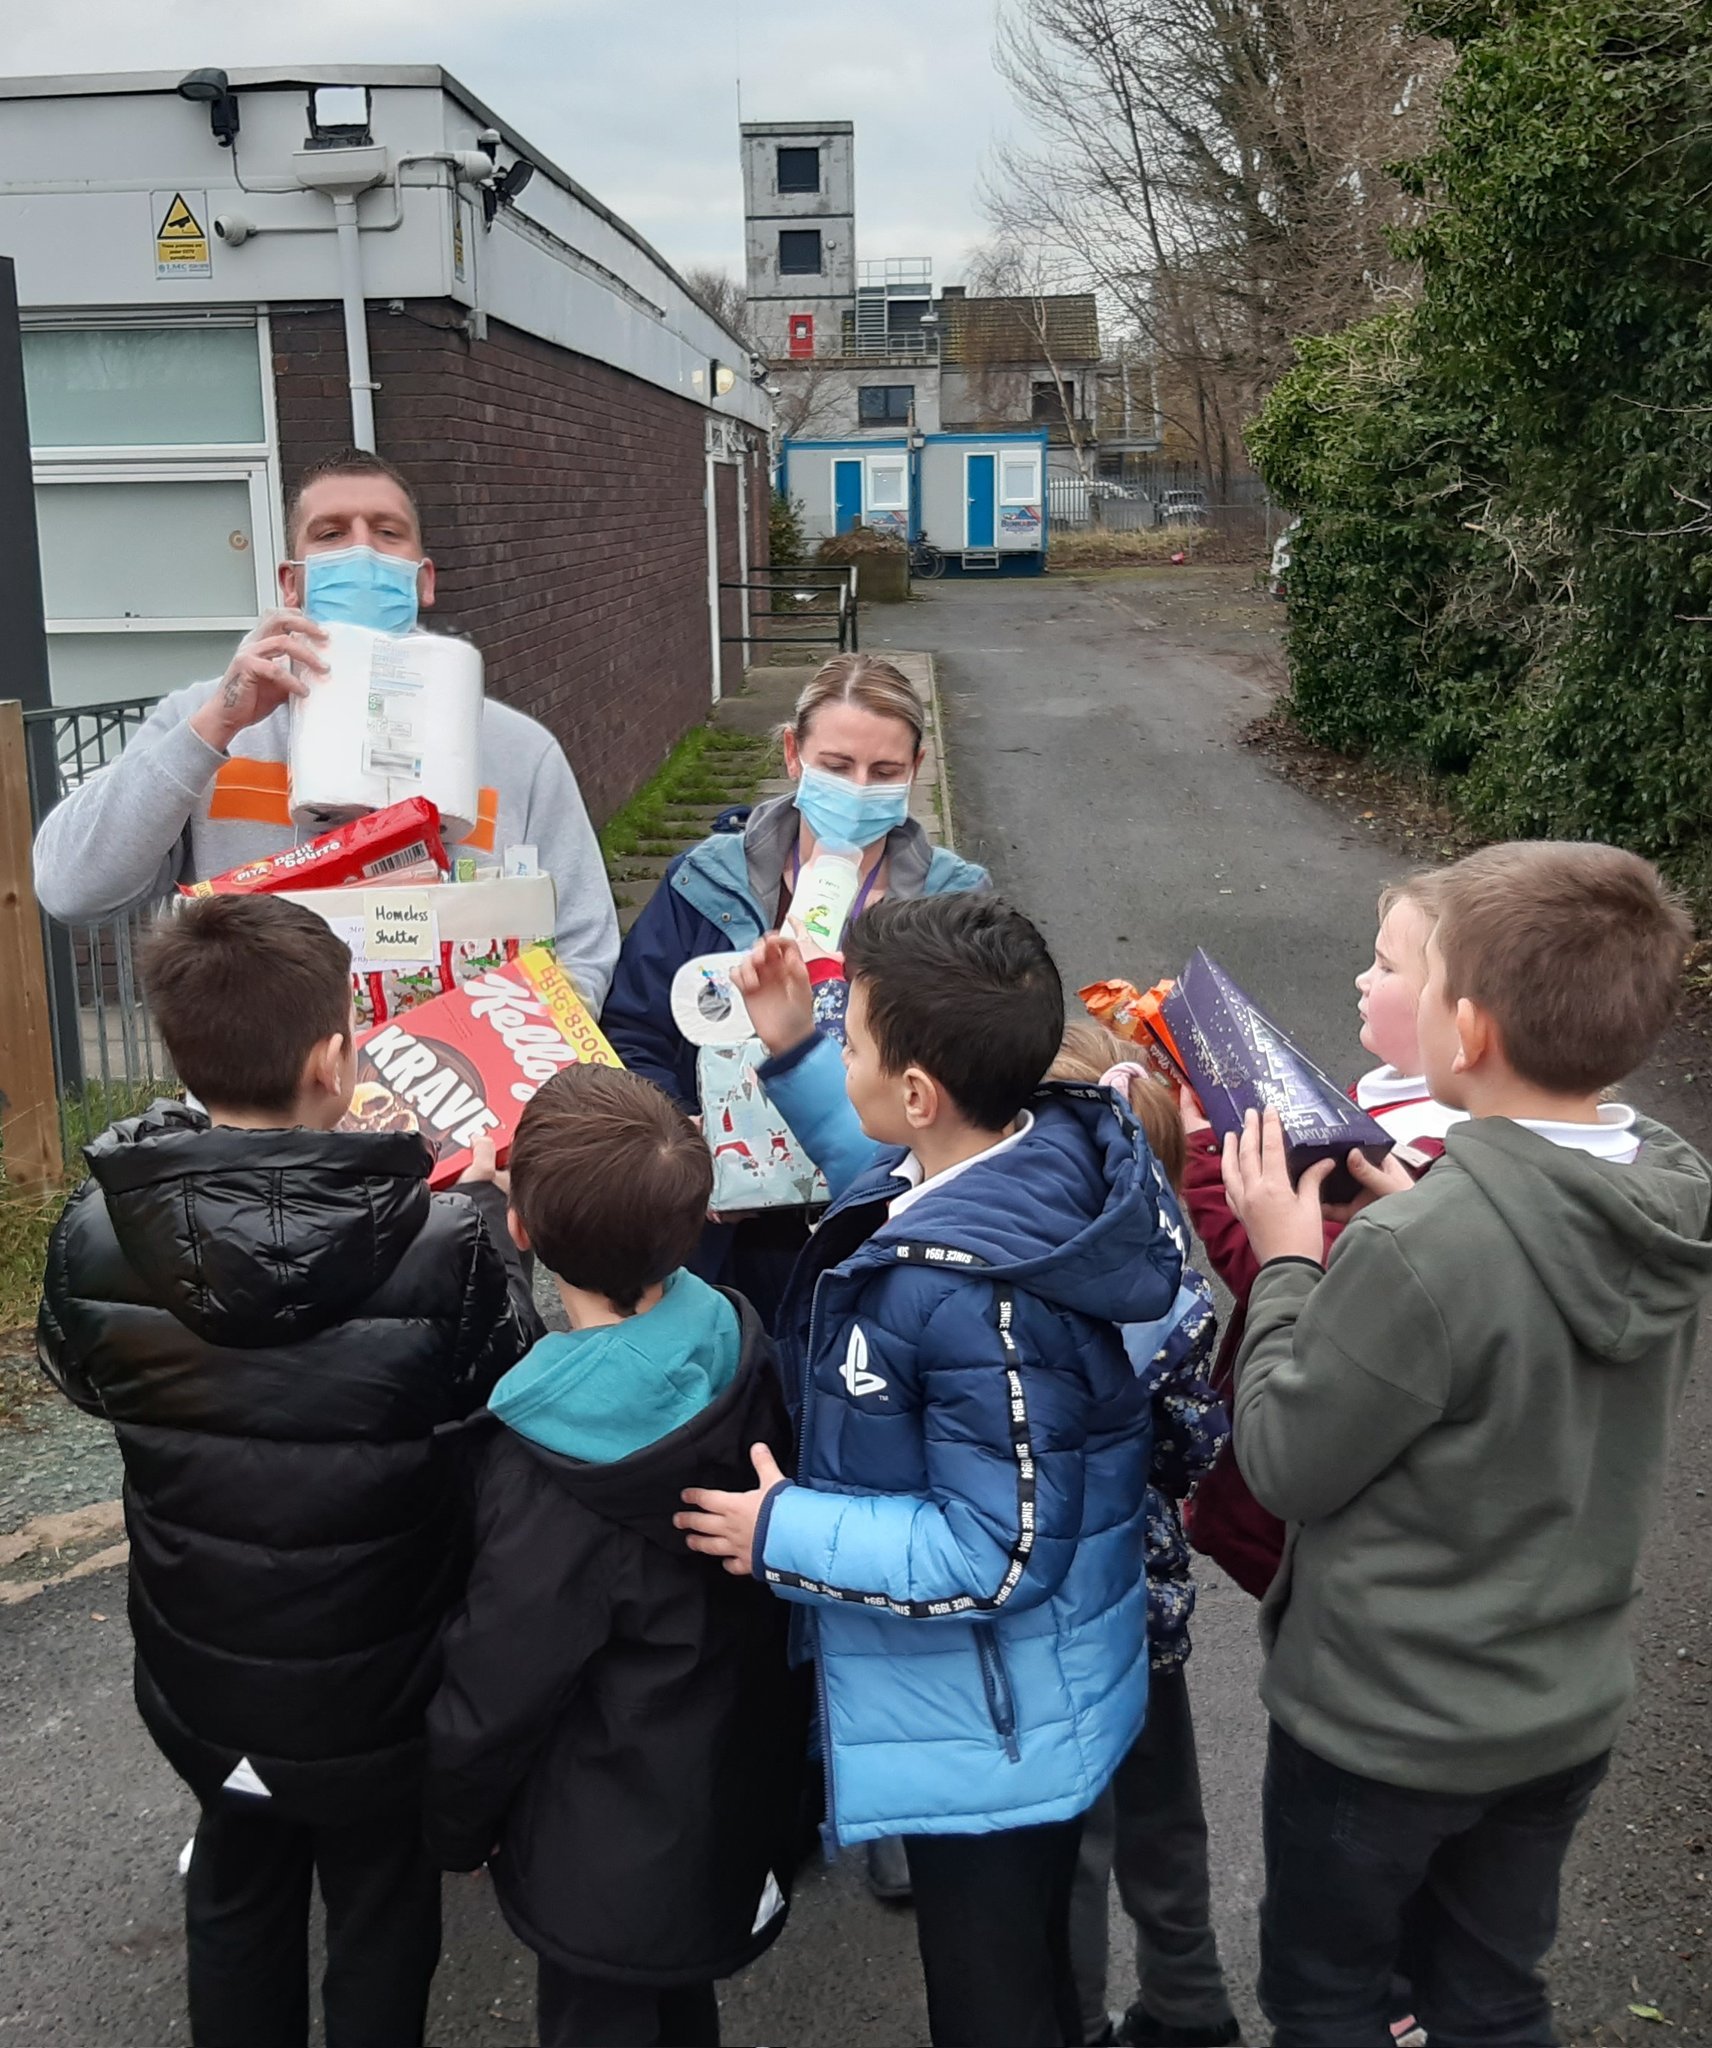 Pupils from Queensferry CP School collected, made and delivered hampers to deserving people in their community over Christmas.